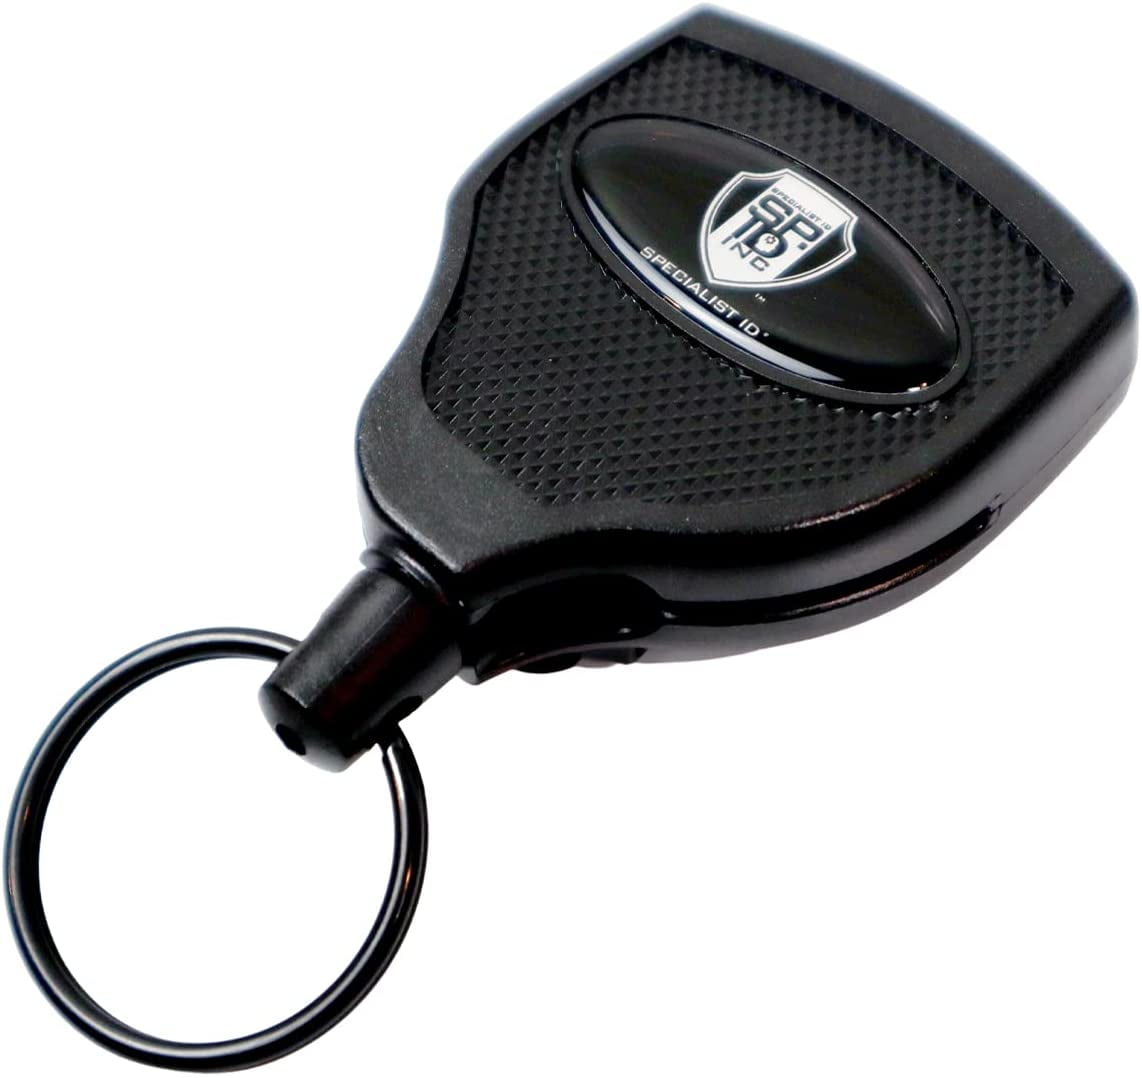 Super Heavy Duty Retractable Keychain - 8oz or 10 Keys - Durable 48” (4 Ft)  Kevlar Lanyard - Rugged Polycarbonate Key Chain Ring Reel Badge Holder with  Steel Belt Clip by Specialist ID (Black) 